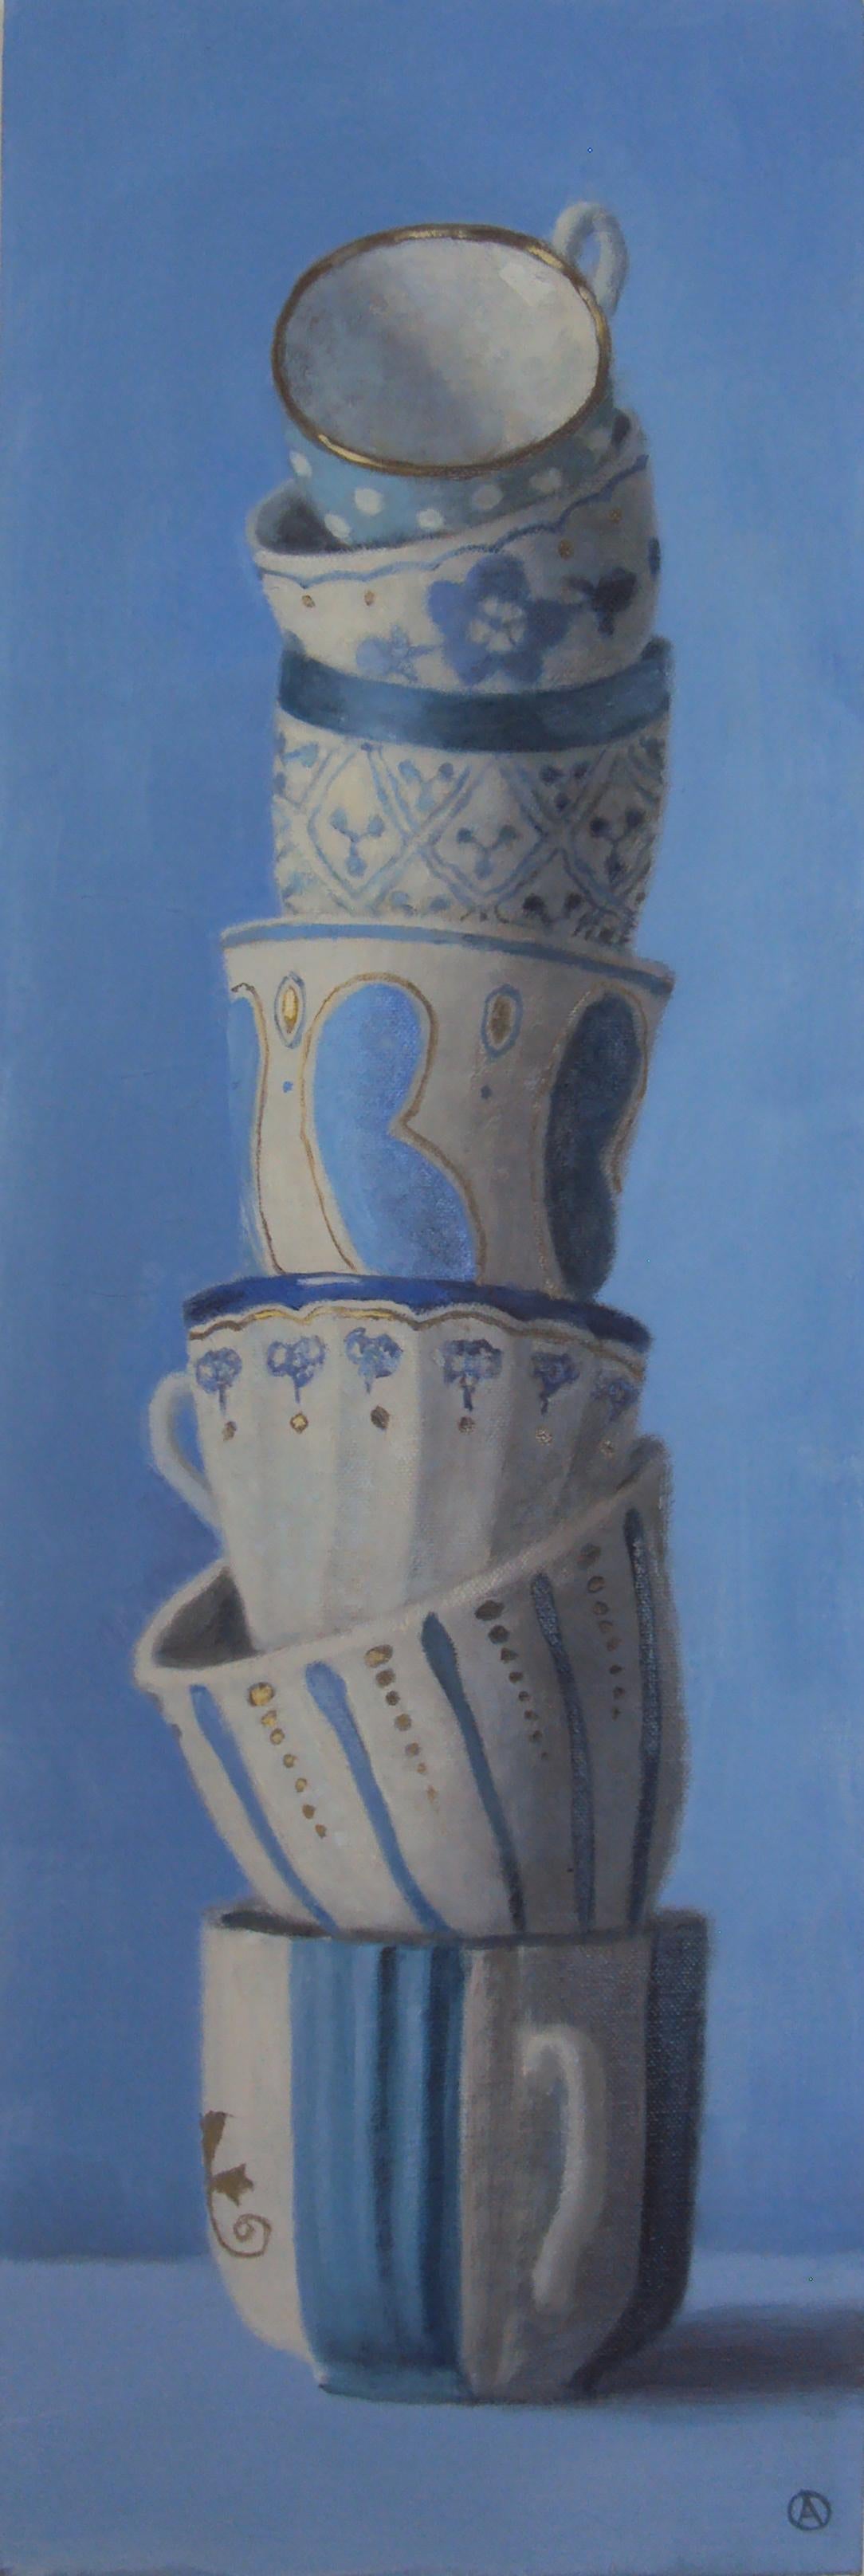 TEACUP TOWER IN BLUE - Still life, realism, contemporary